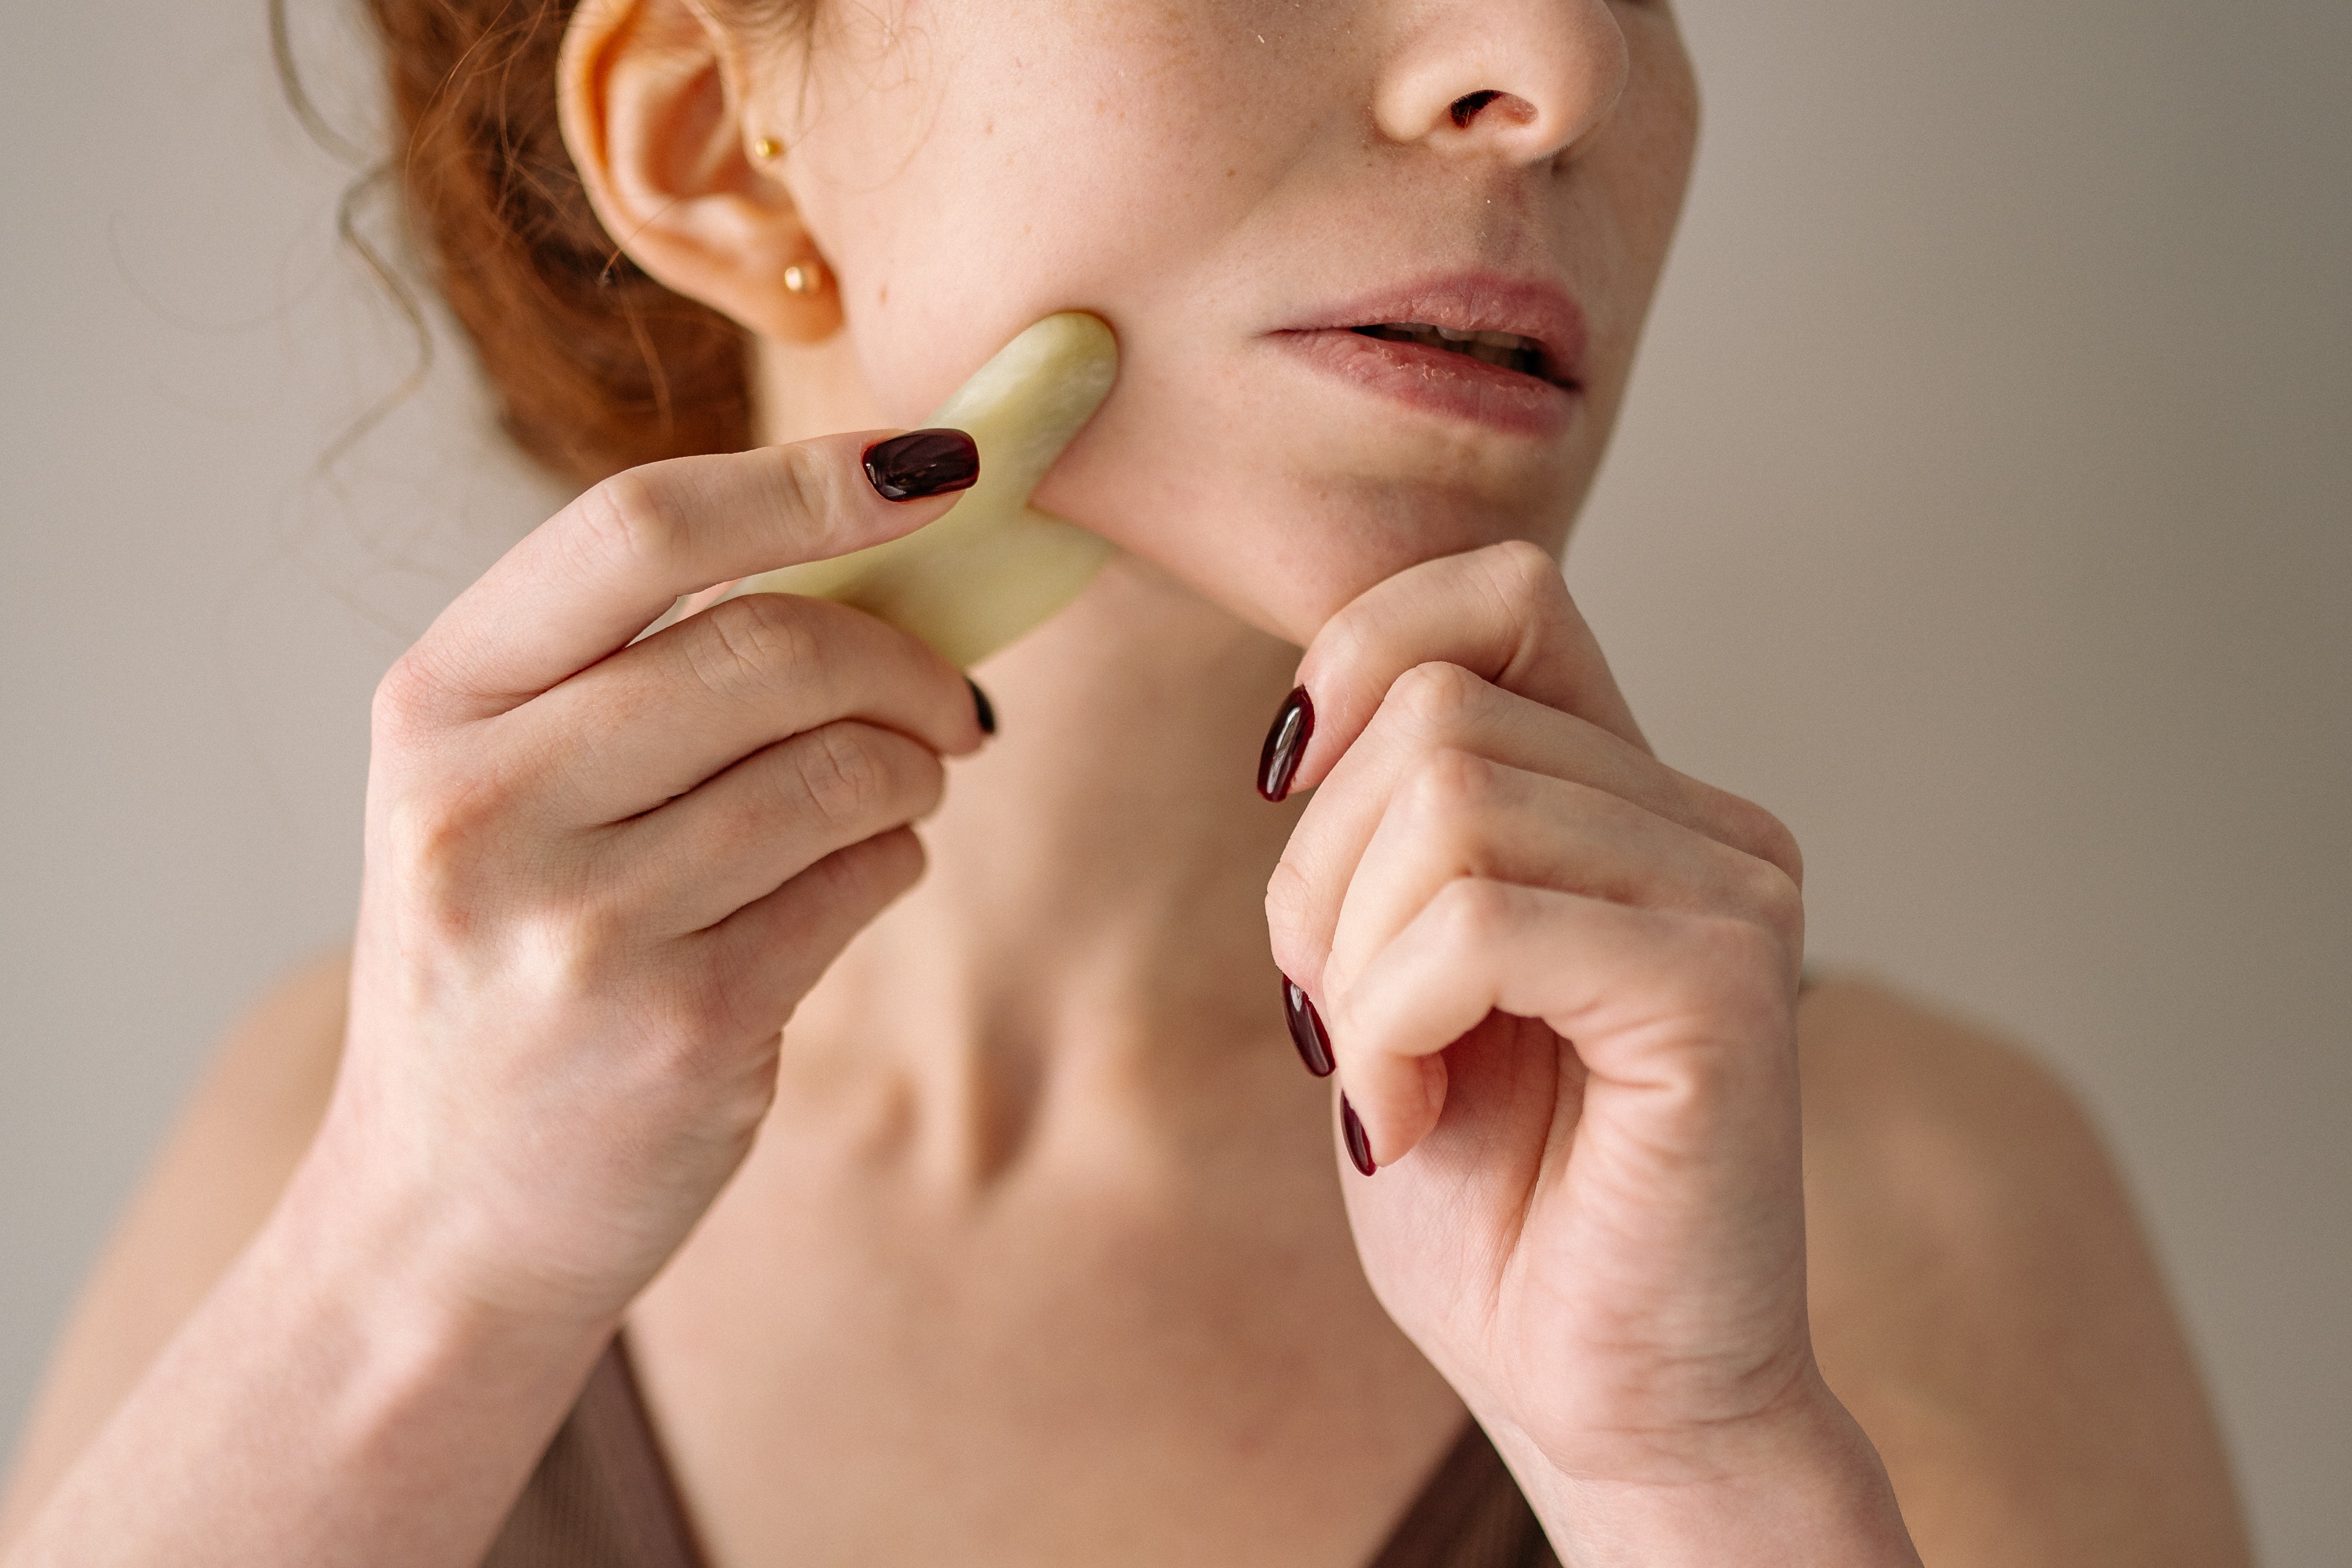 Benefits of Gua Sha: An Ancient Healing Technique, which translates to "scraping sand" in Chinese, involves using a smooth-edged tool to apply pressure and scrape the skin gently.